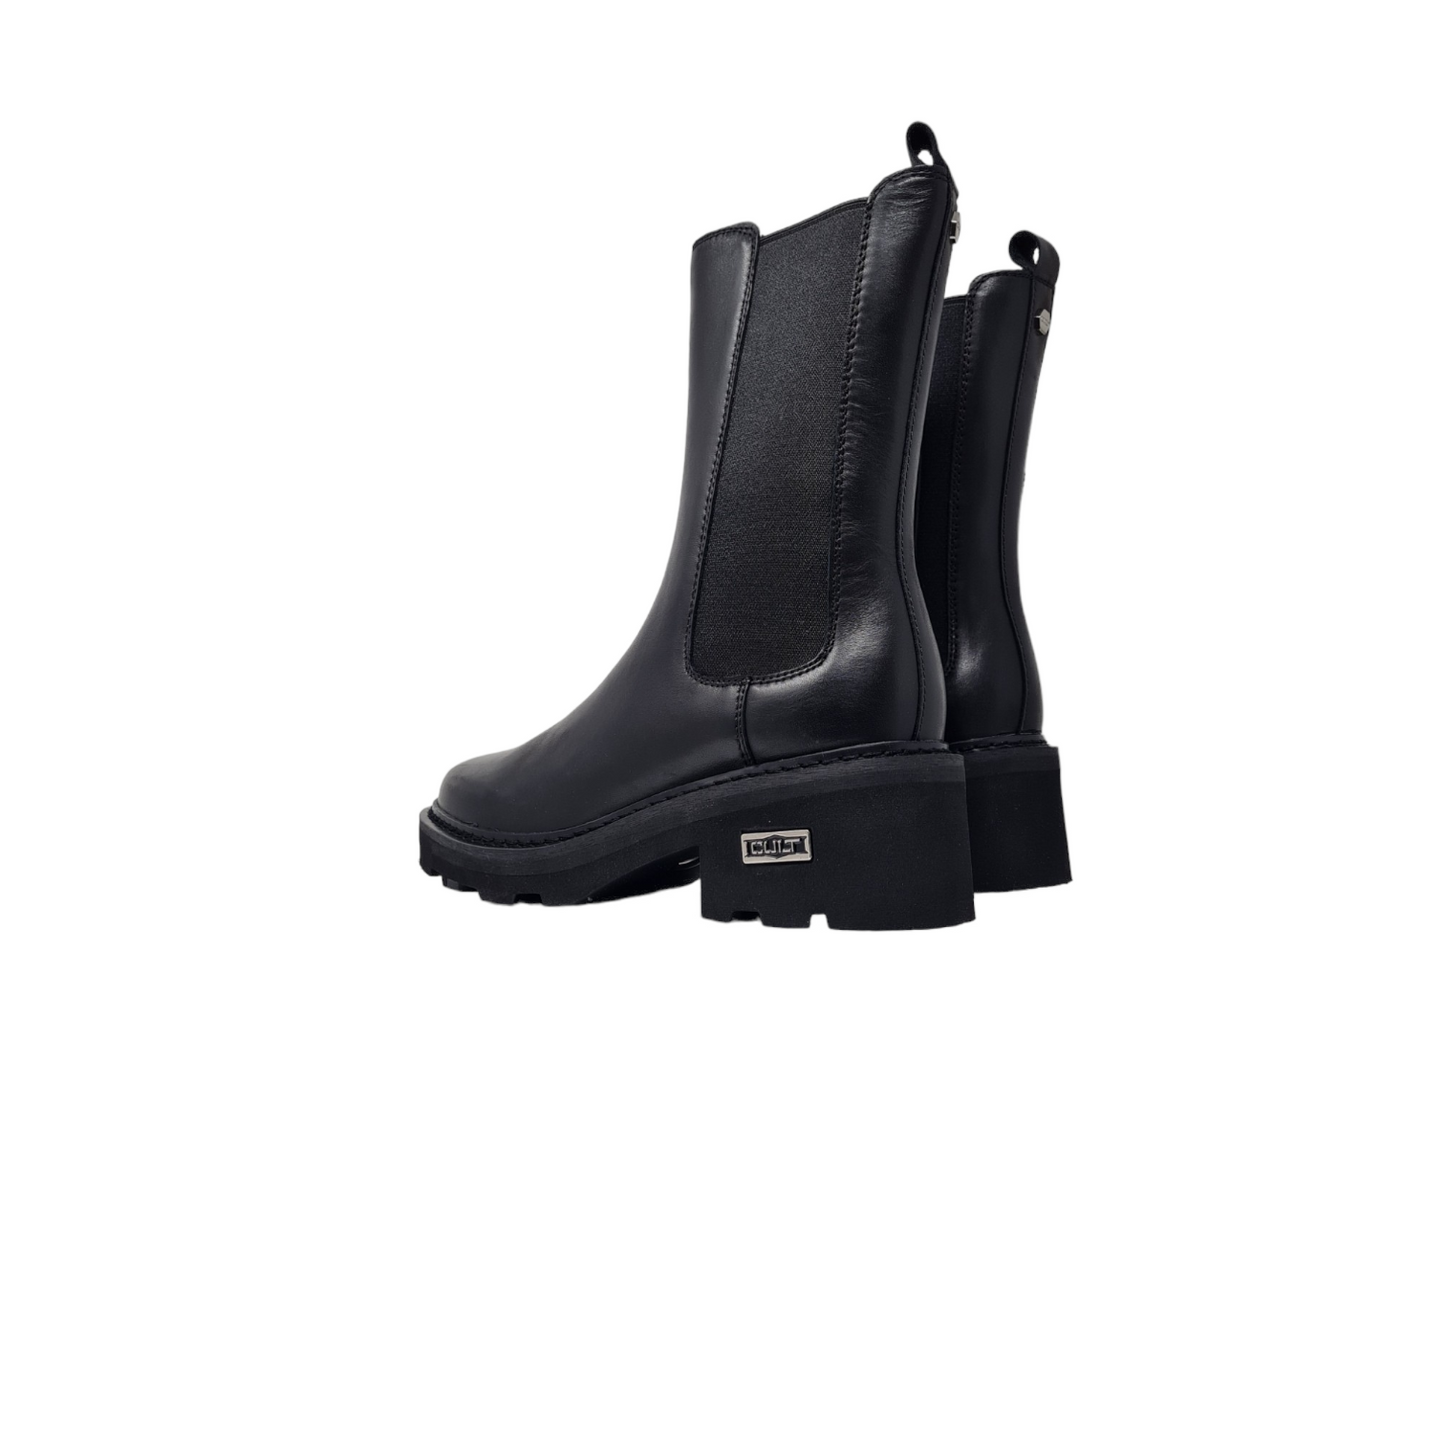 Boot CLW354500